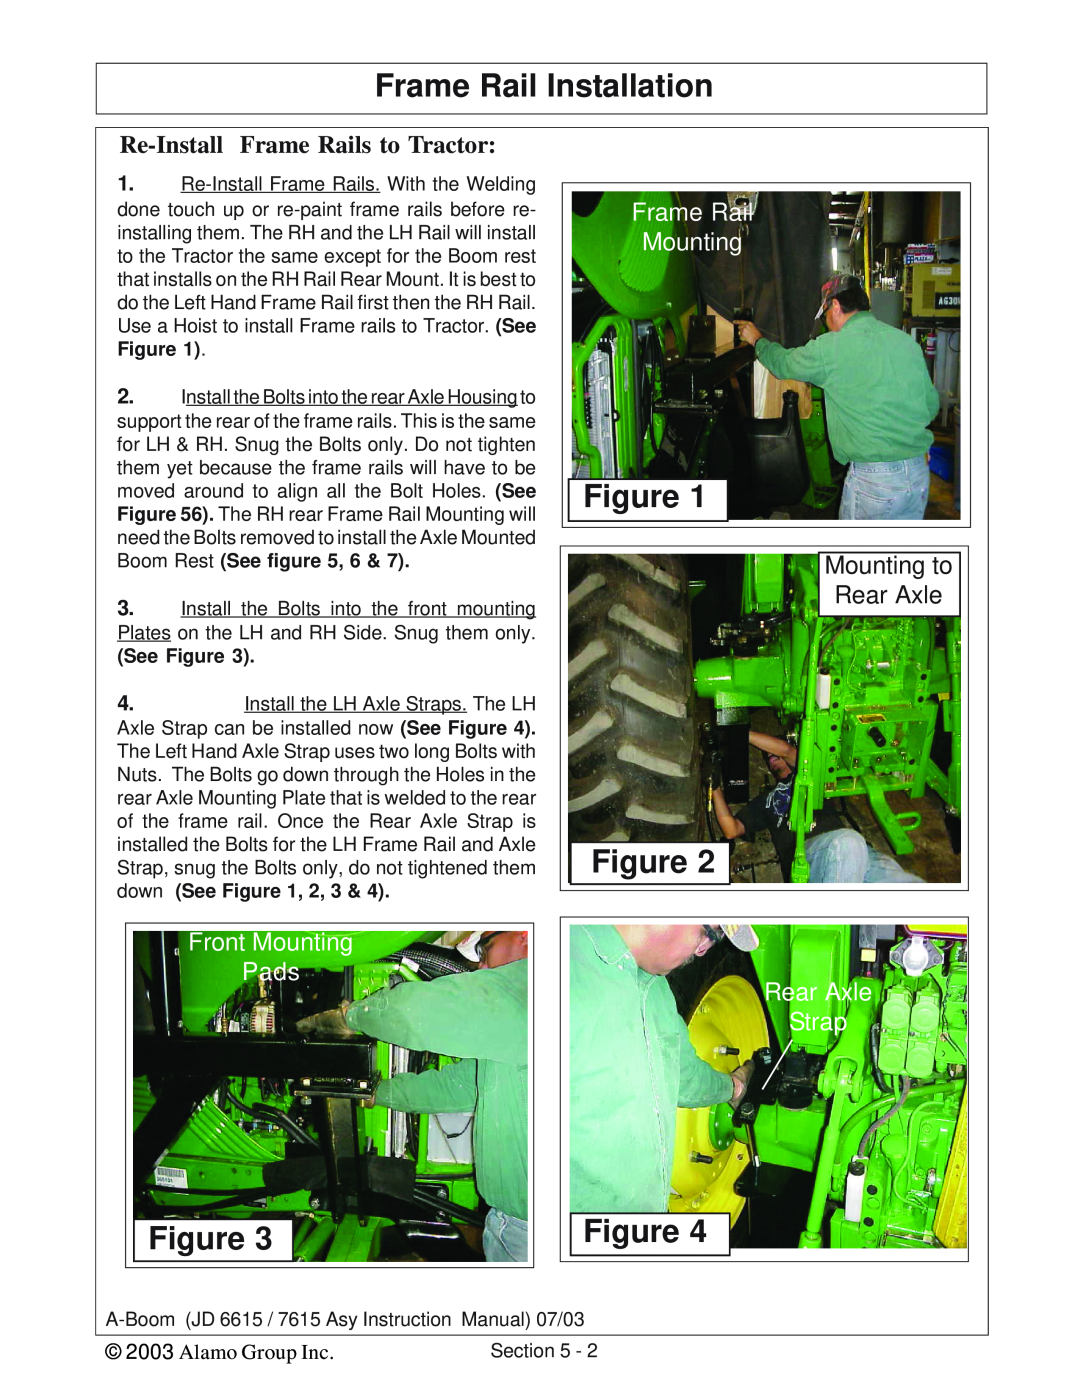 Alamo DSEB-D16 Re-Install Frame Rails to Tractor, Front Mounting Pads, Frame Rail Mounting, Rear Axle Strap, See Figure 